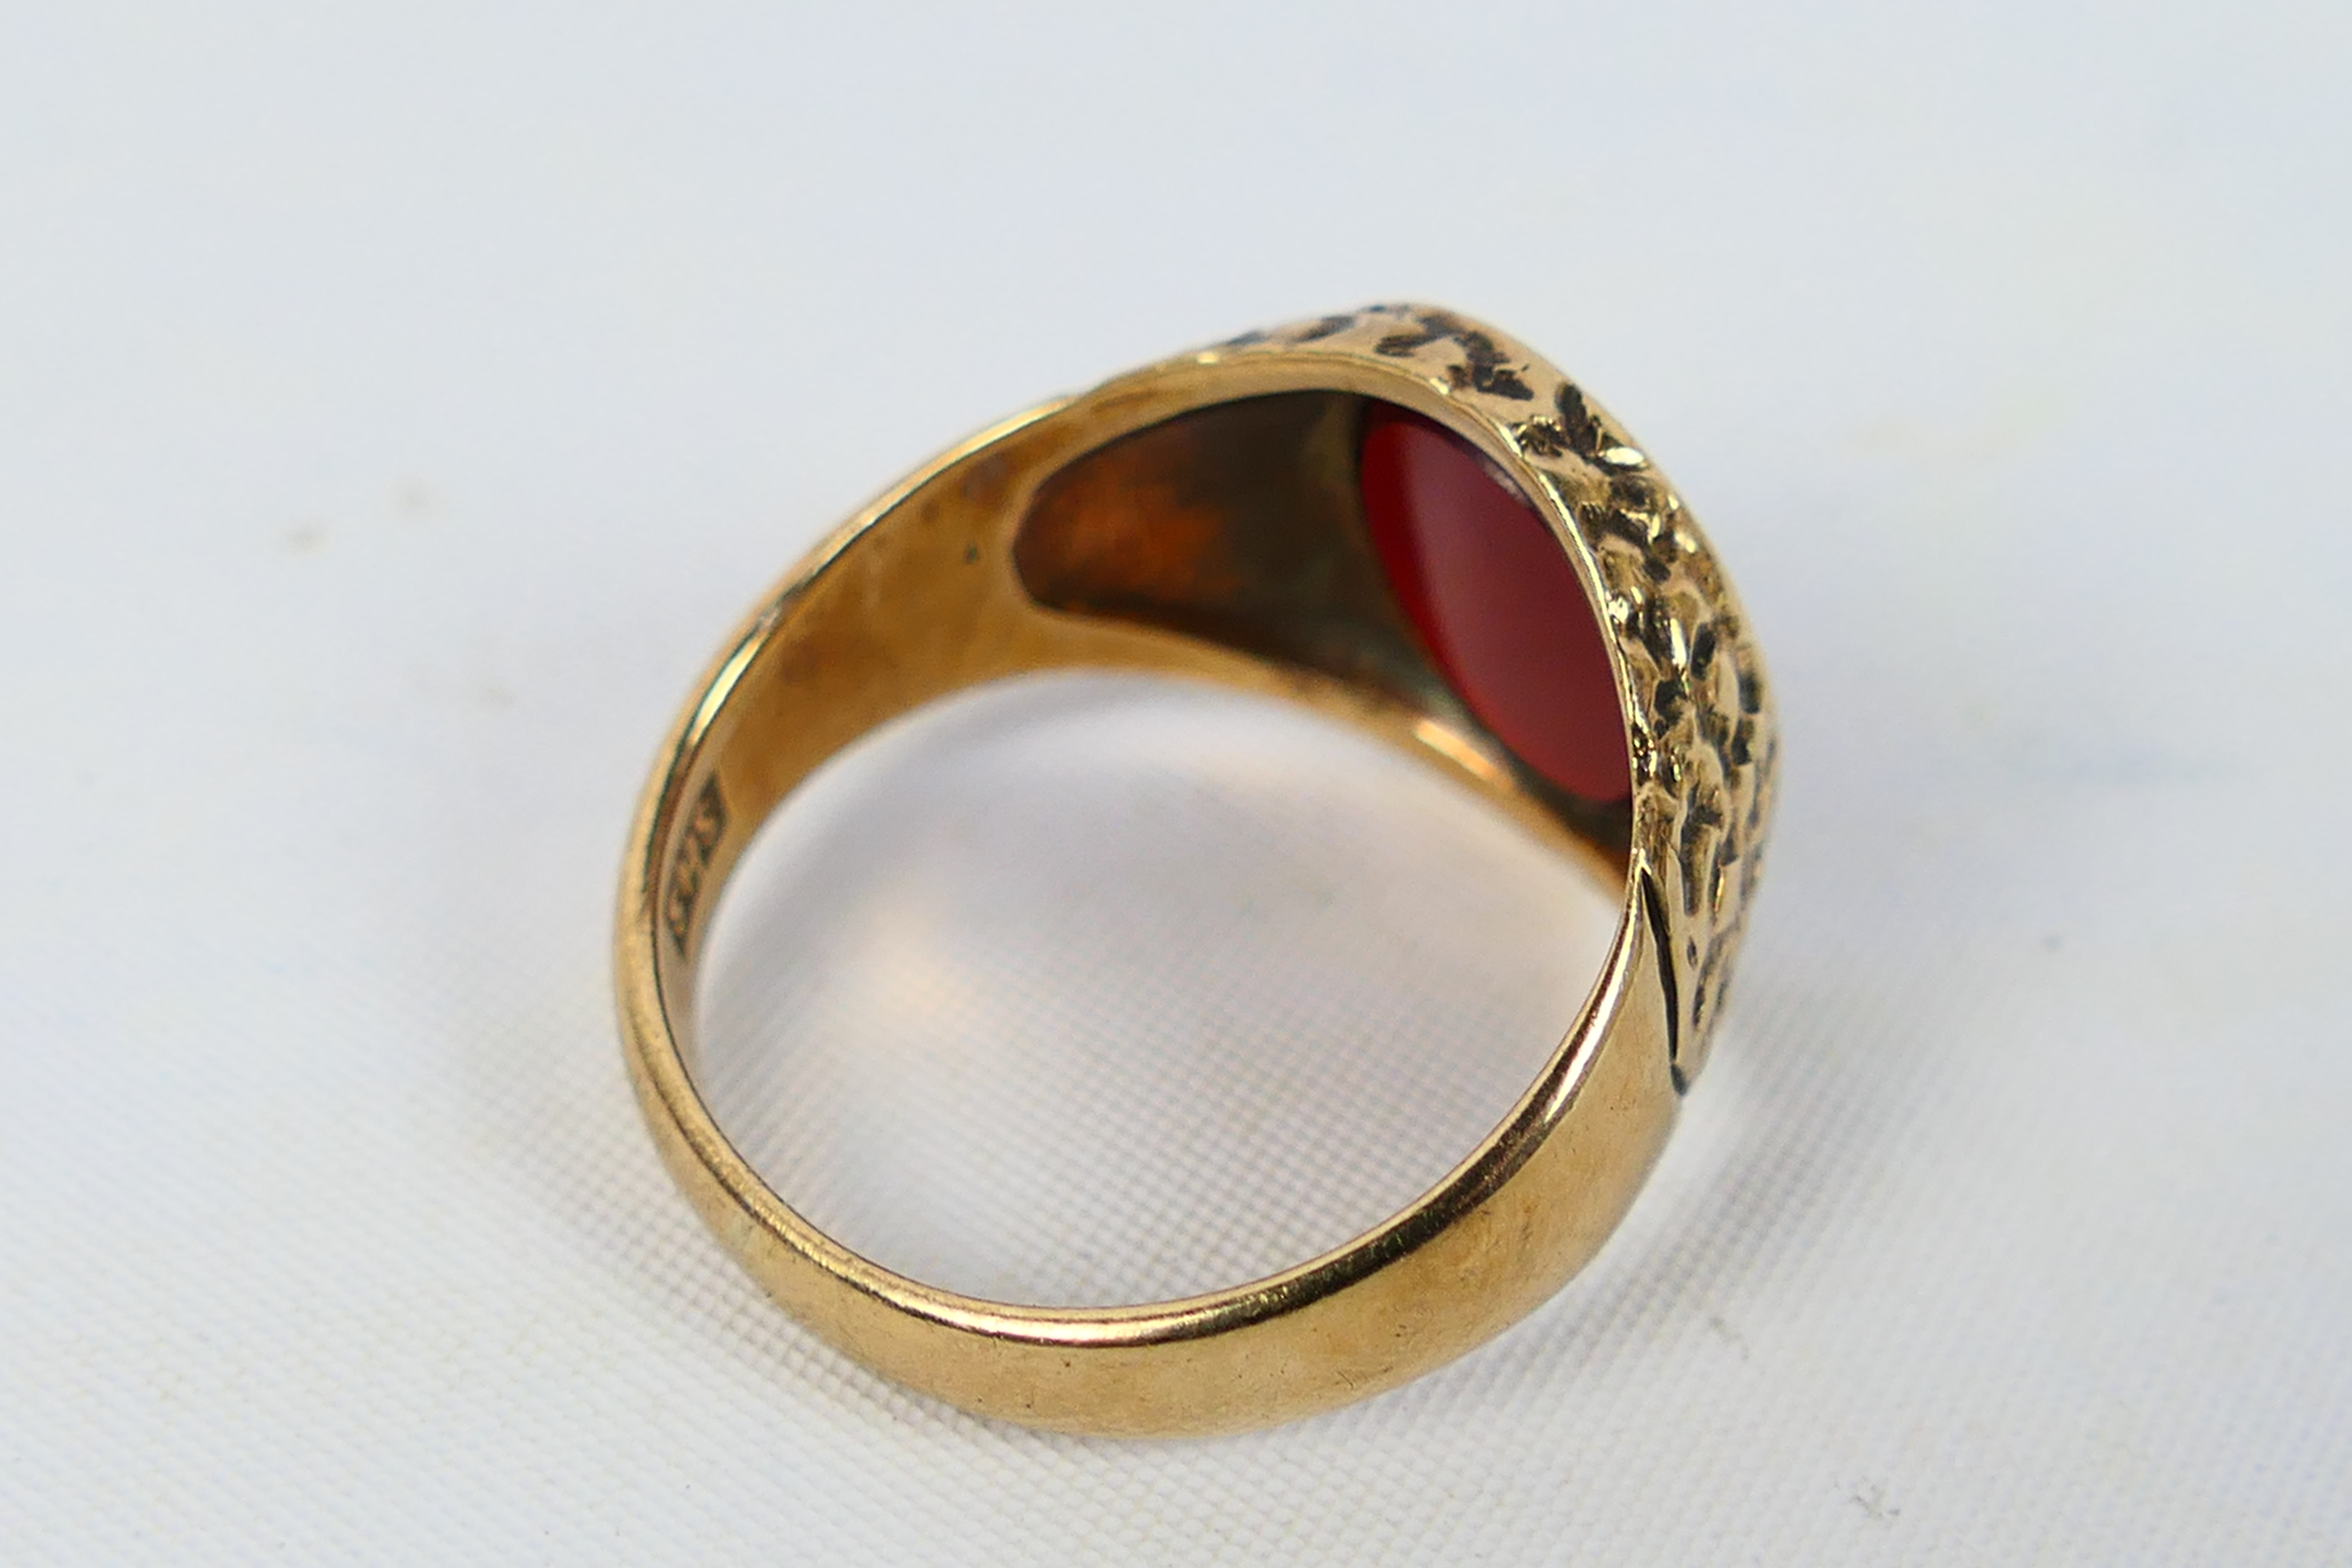 A gentleman's 9ct yellow gold signet ring set with carnelian, size S, approximately 6.1 grams. - Image 3 of 5